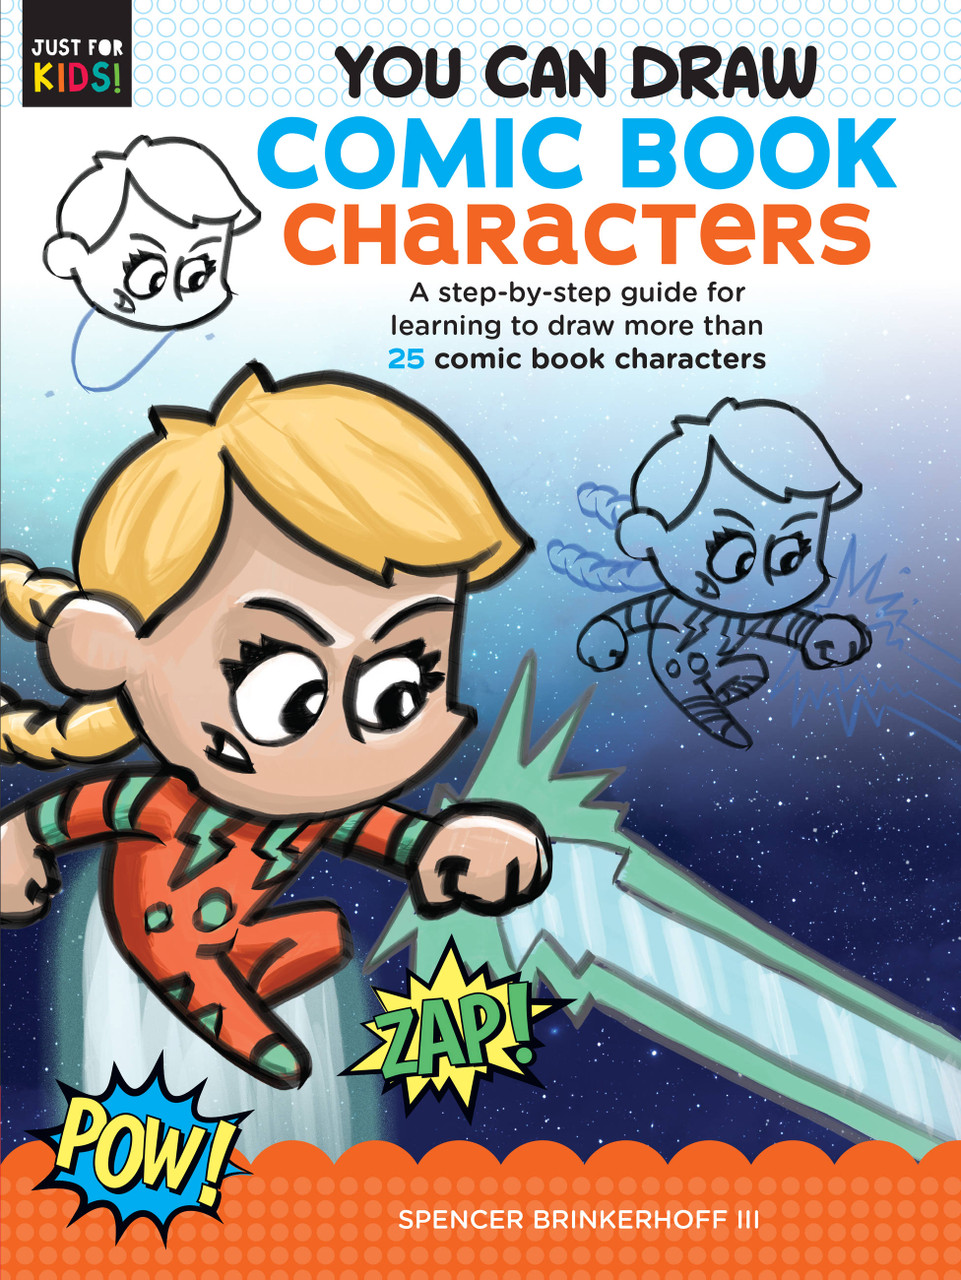 Kids Comic and Cartooning Drawing (Ages 8-12) [Class in NYC] @ The